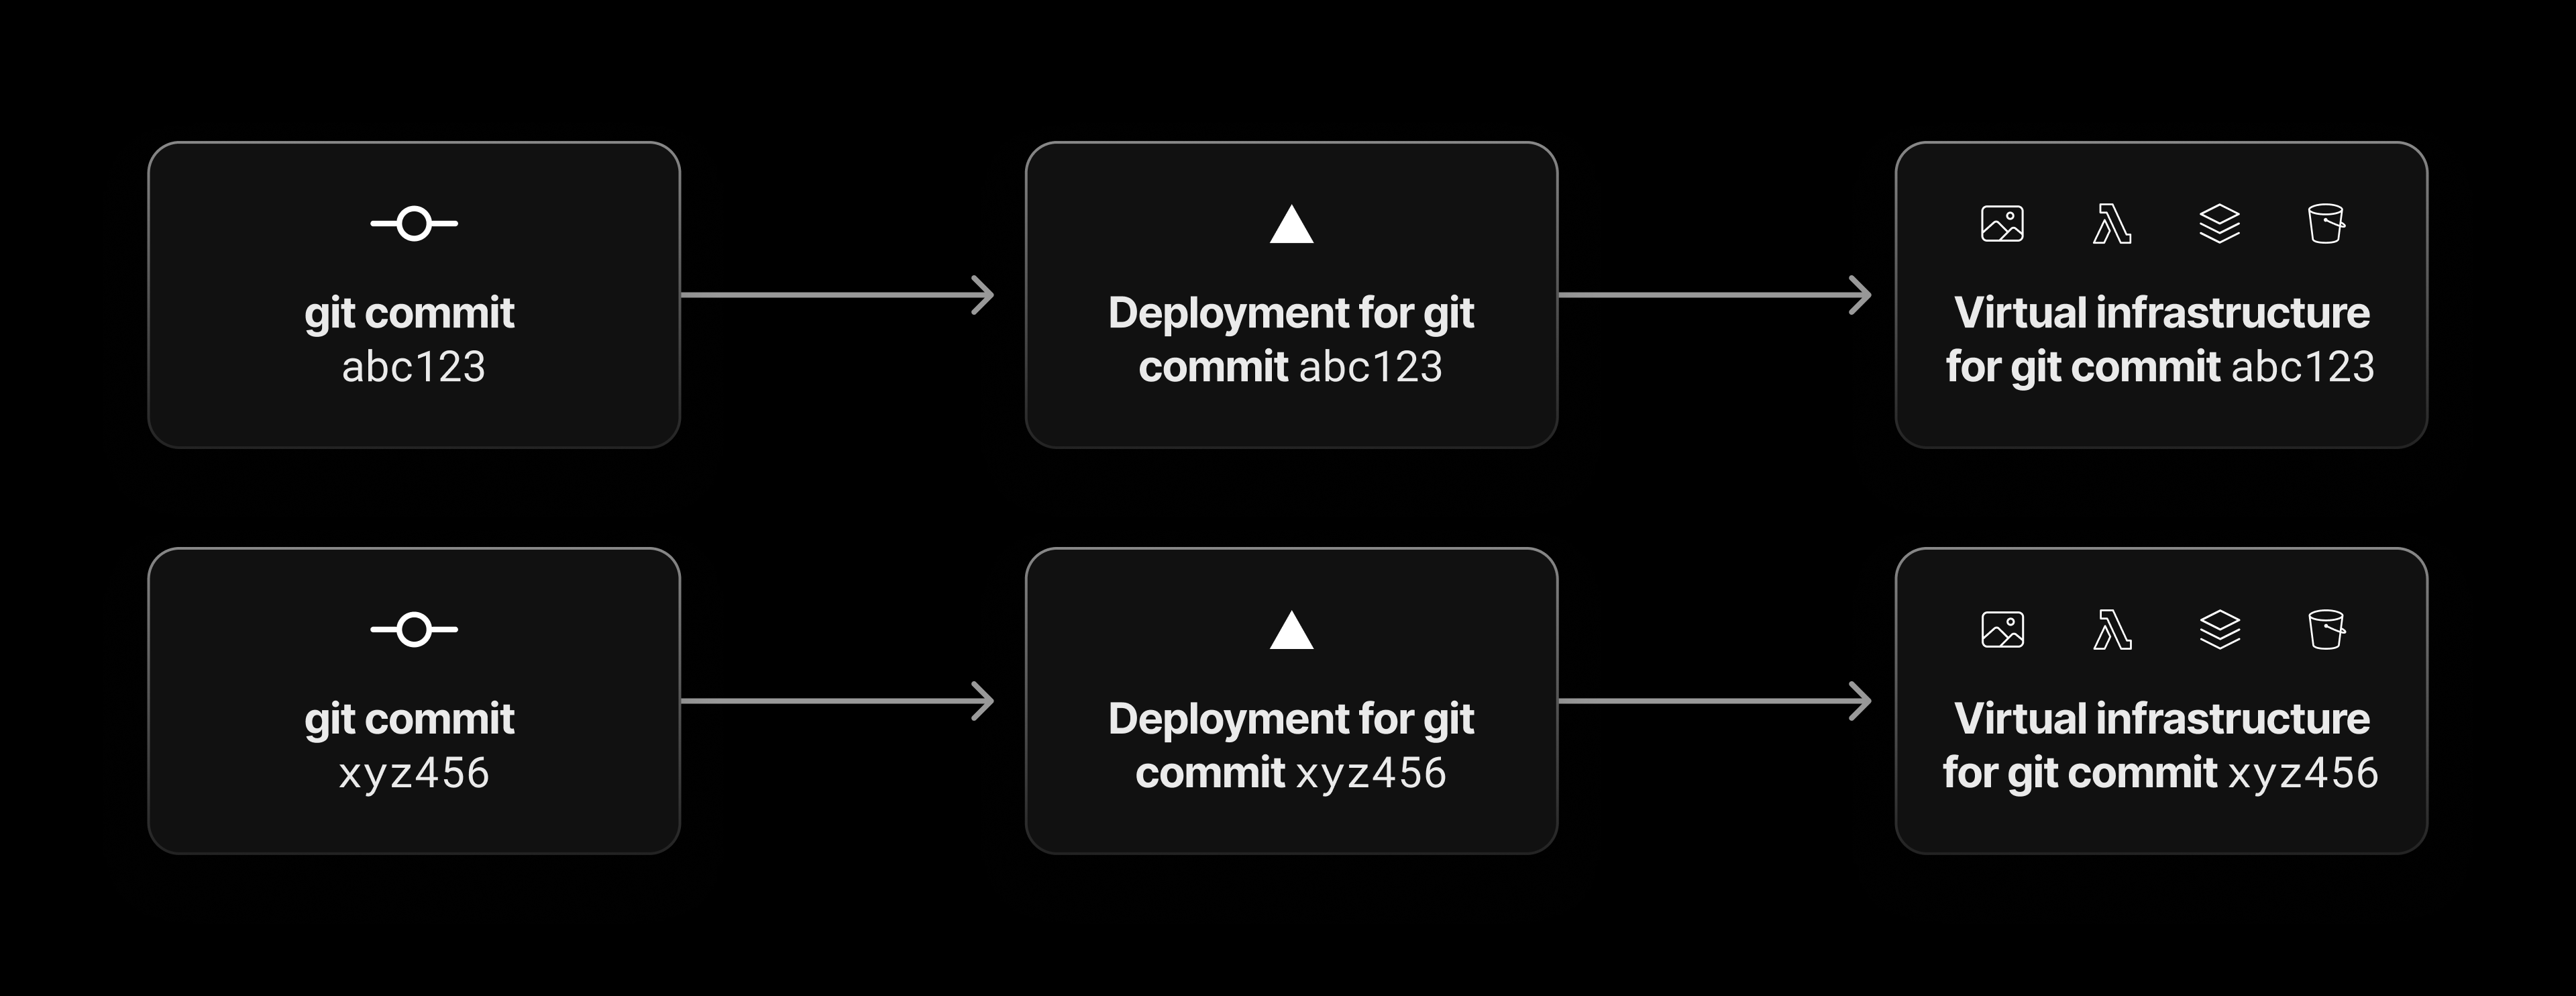 Each commit gets an immutable deployment and generates virtual infrastructure.